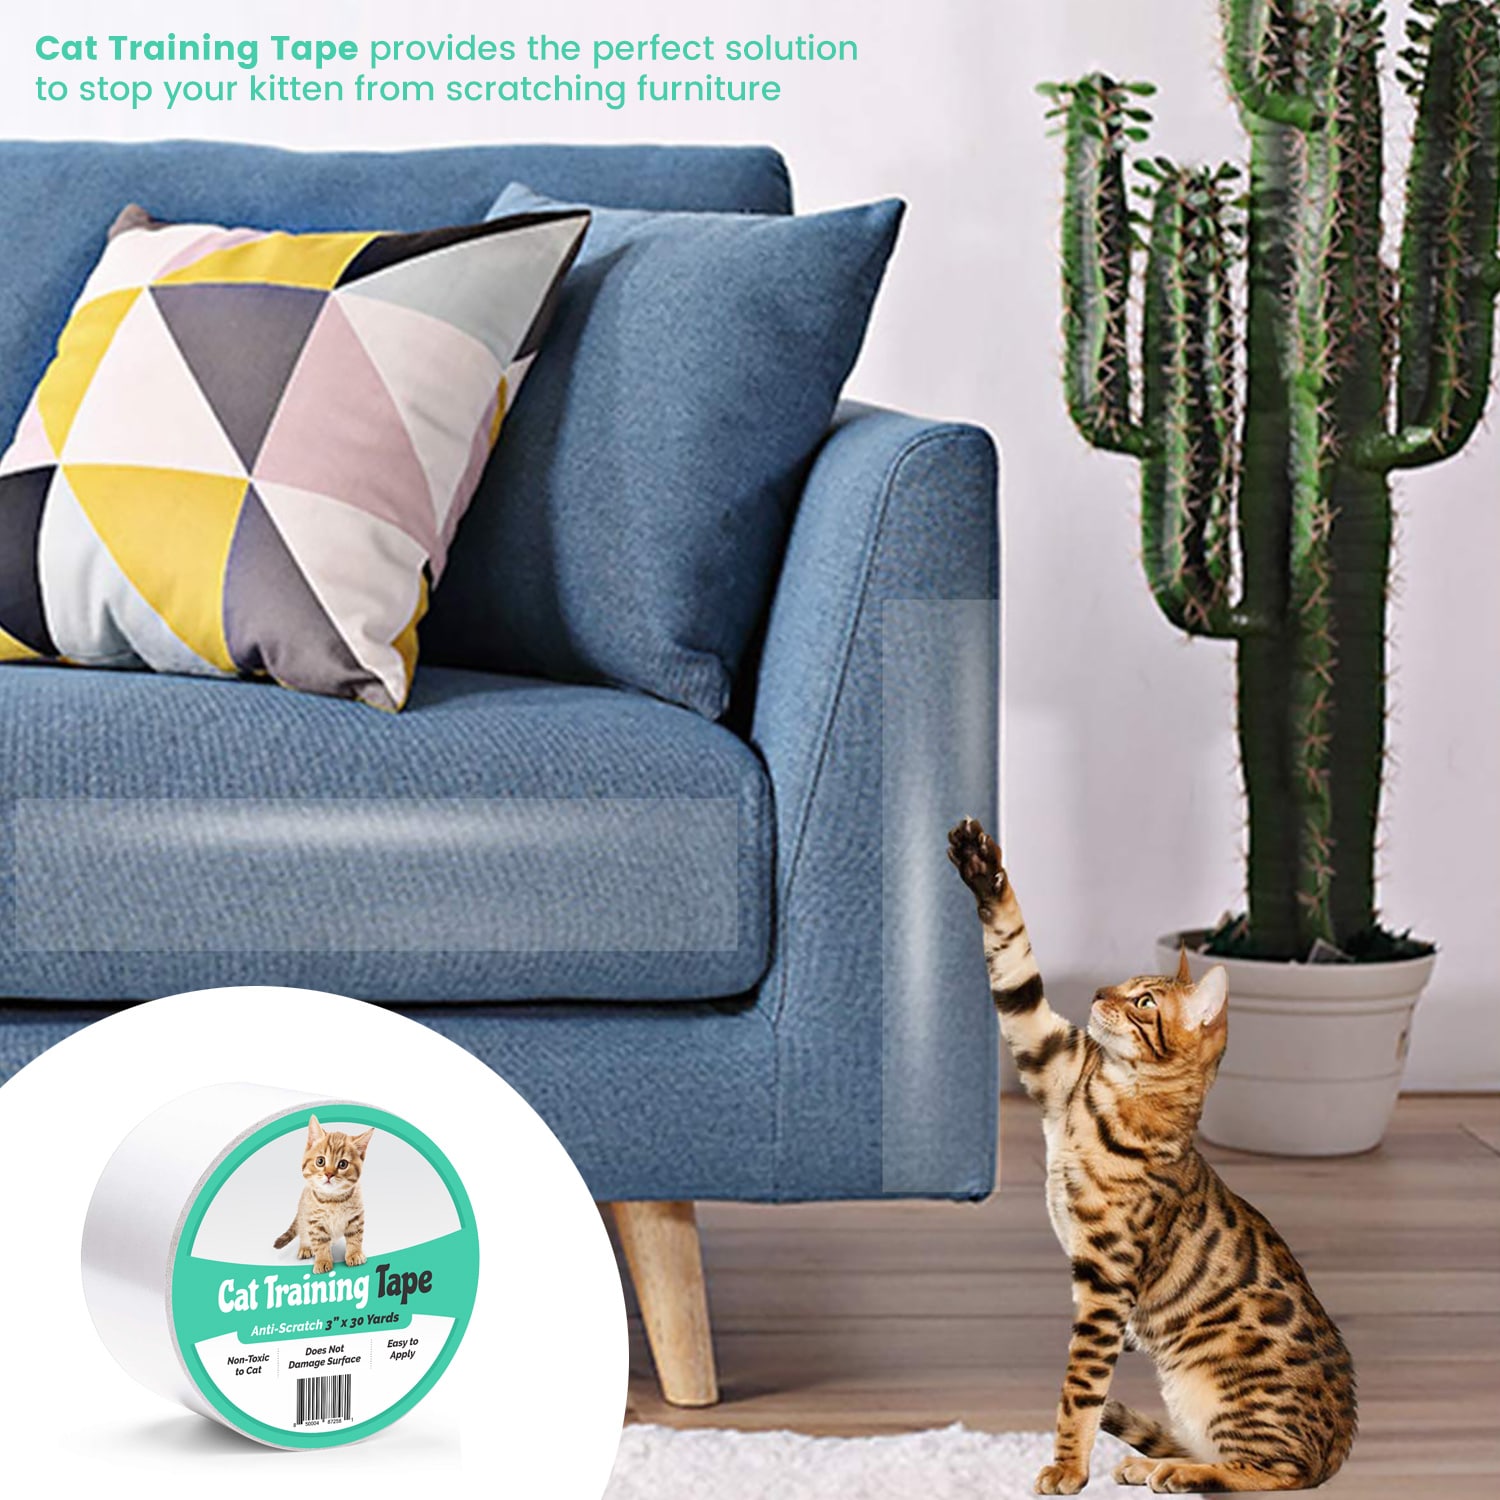 Fabric upholstery furniture tape | Cat scratch prevention tape - Shoo-Kitty